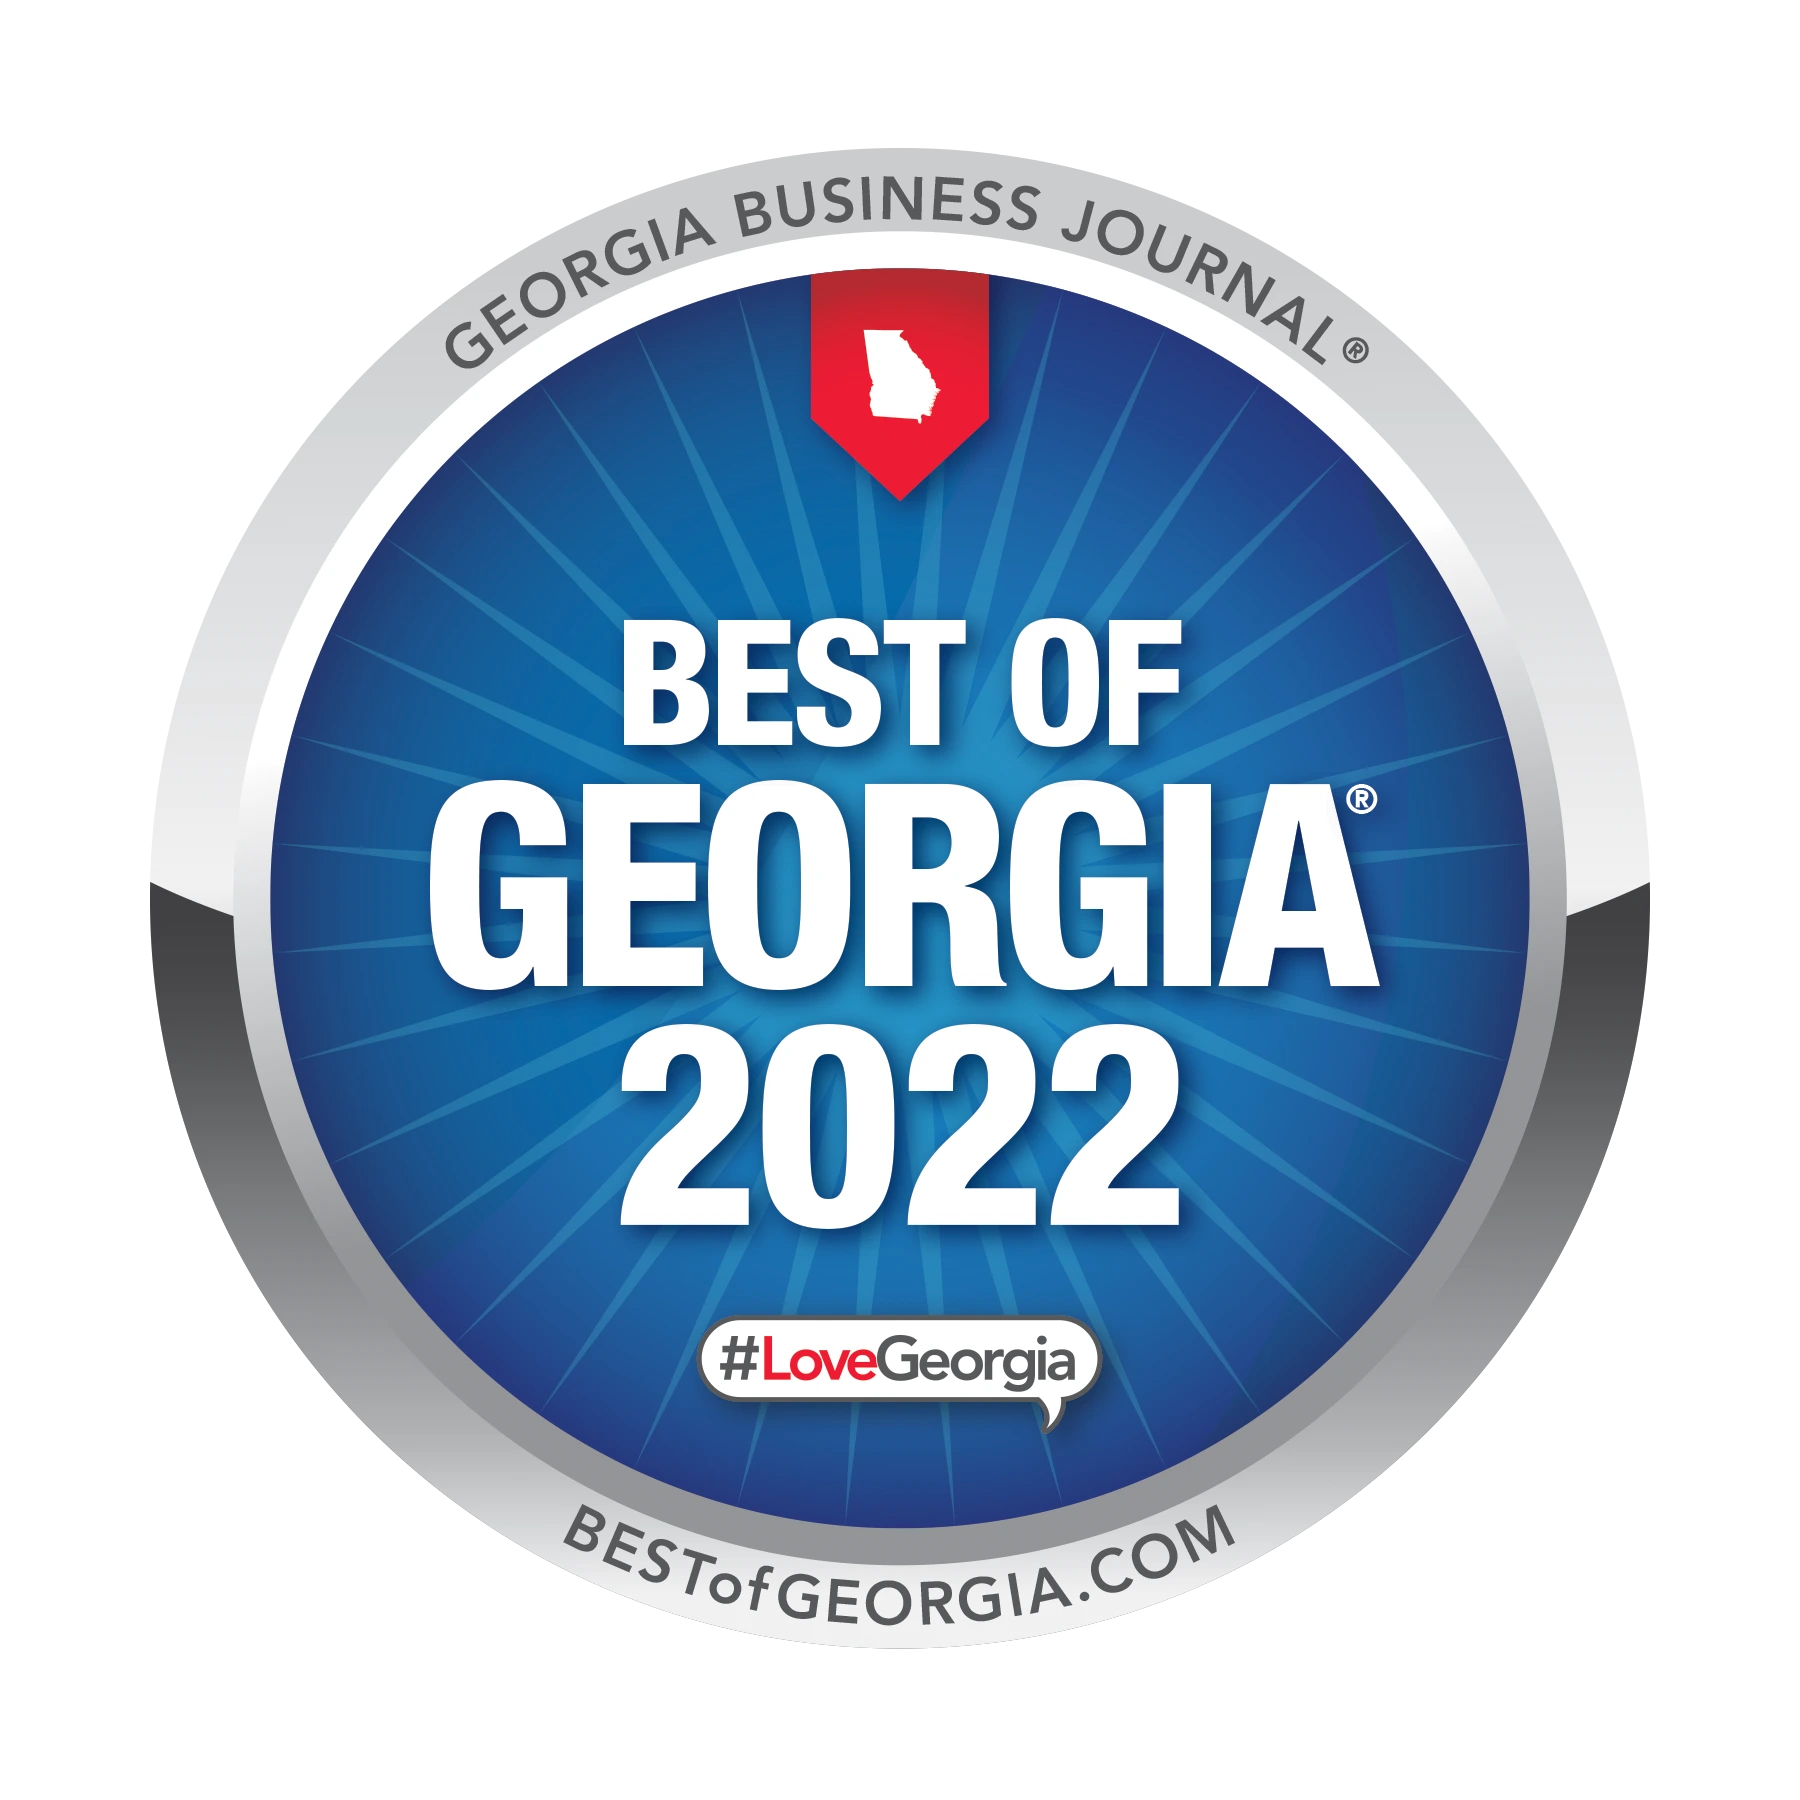 Best of Georgia law firm 2022 The Law Office of Julie C. Moore Villa Rica Ga